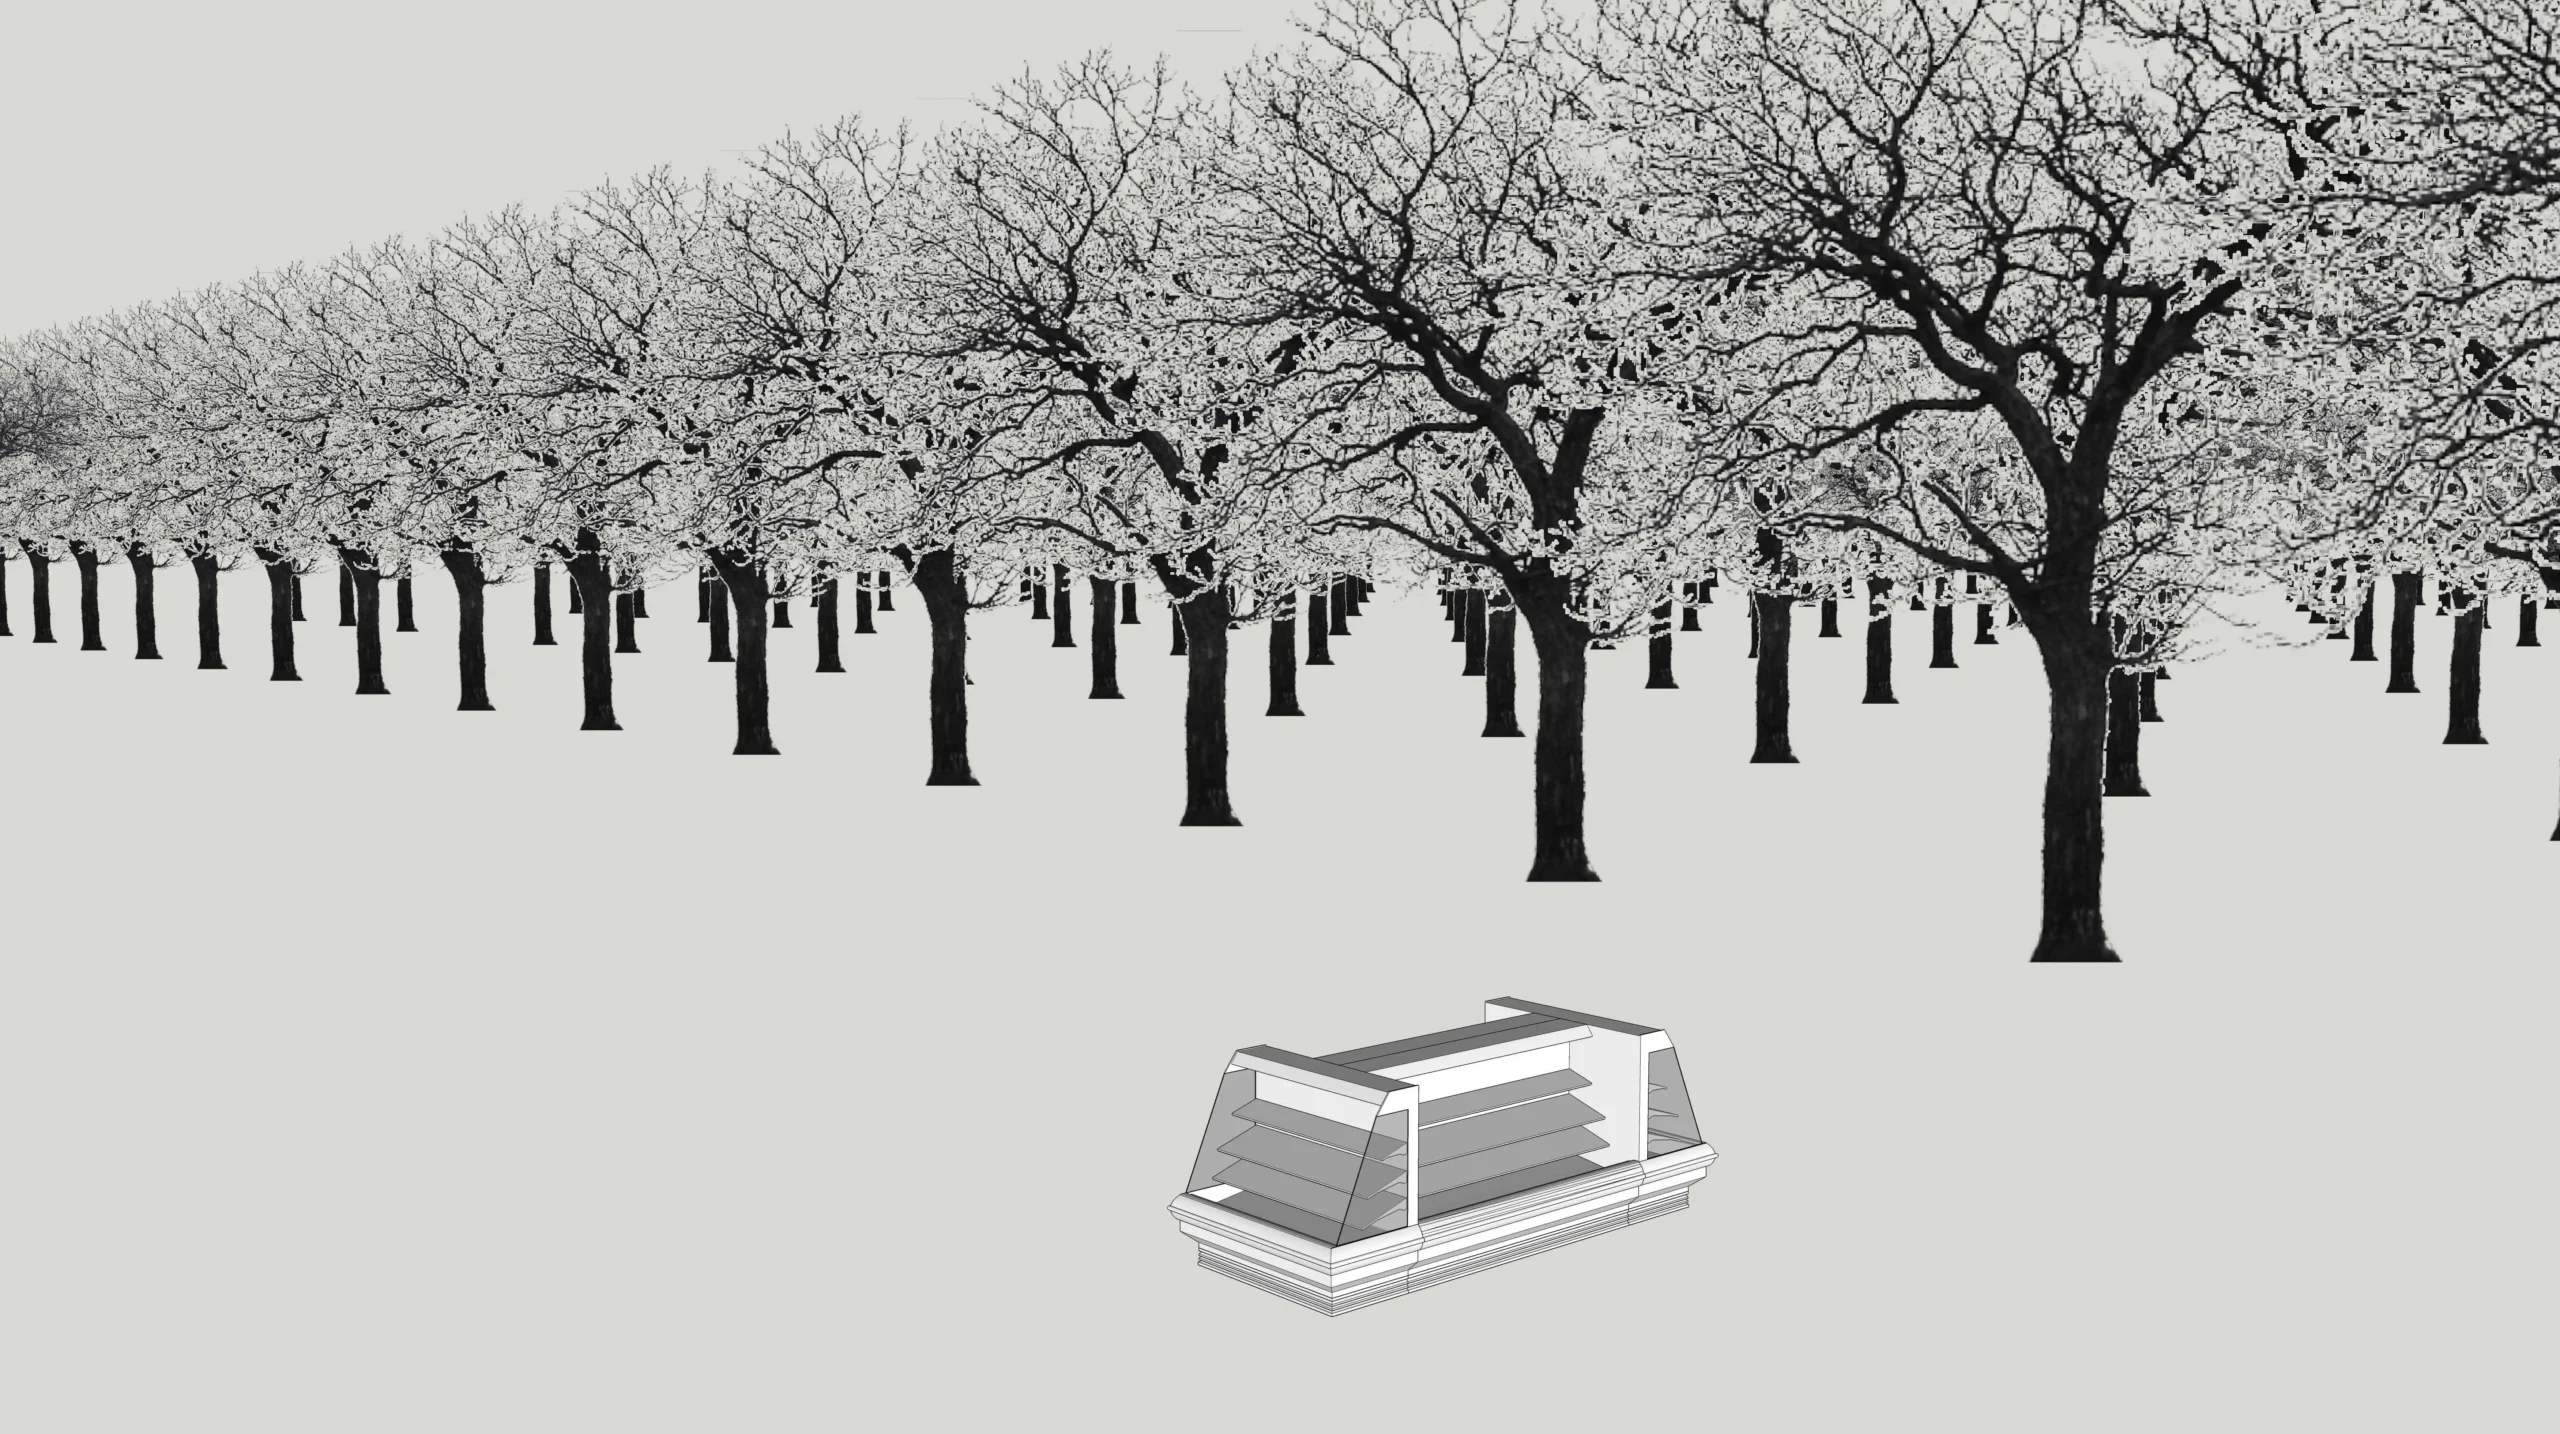 A monotone image of a clip art empty food refrigerator at the edge of a forest of clip art, repetitive tree illustrations.